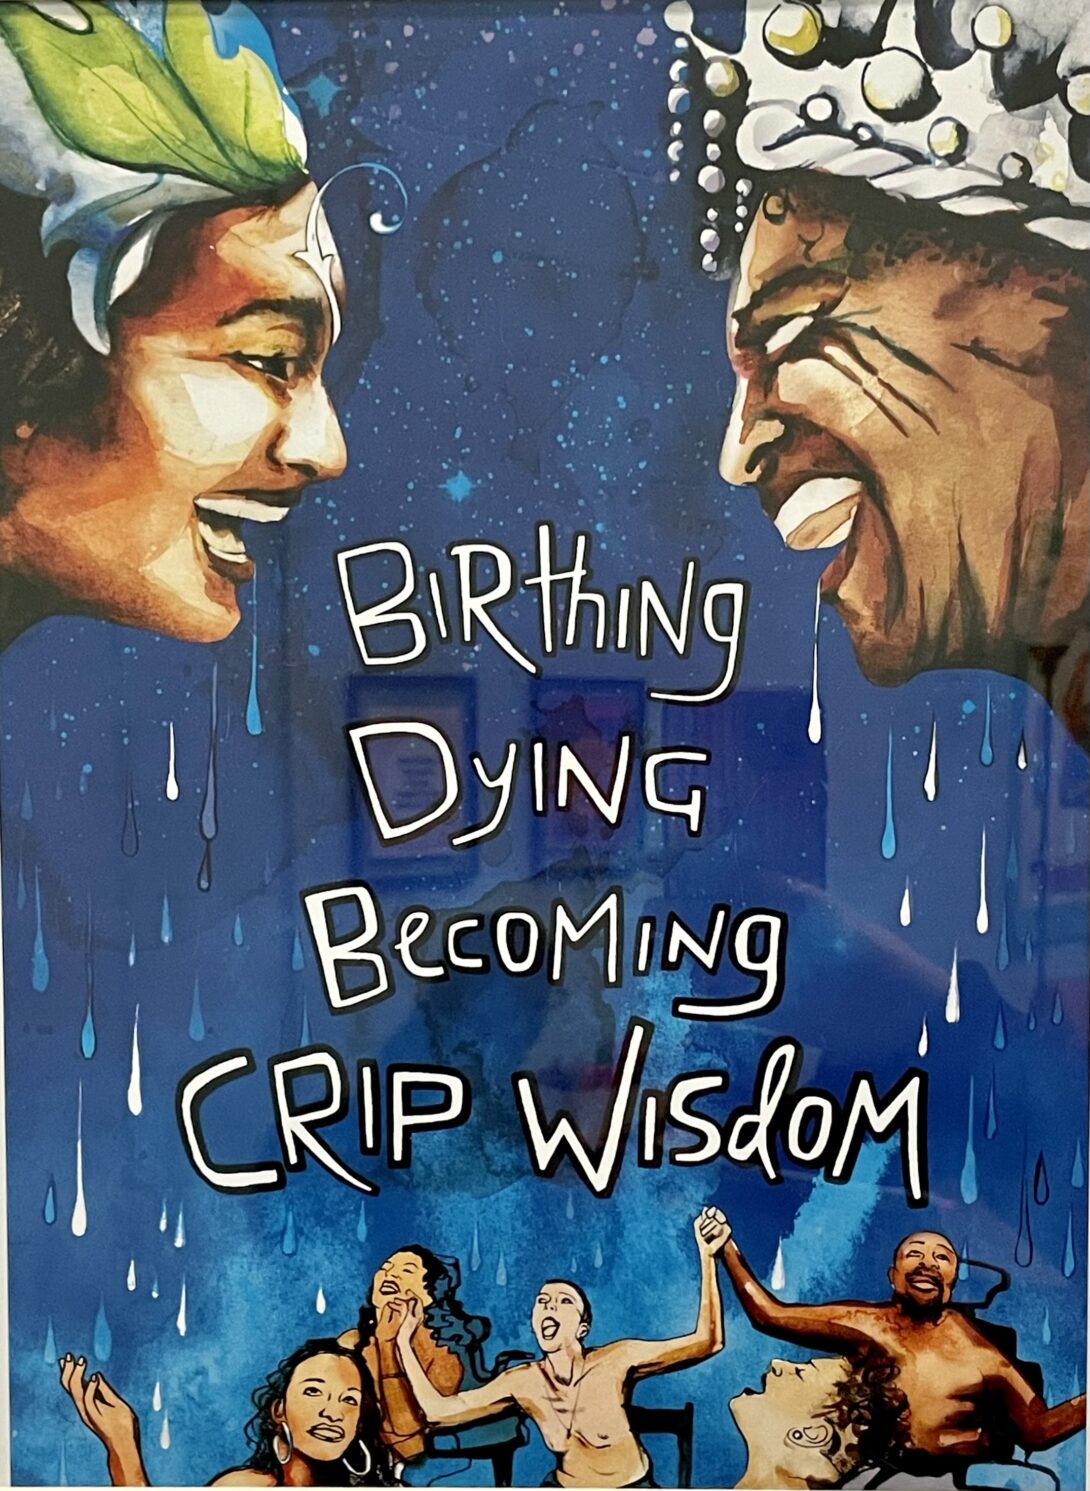 A tan rectangular frame with a thick white border around the artwork in the center. The artwork has an ombre background that fades from deep blue to light blue. In the top right and left corners, there are the faces of two individuals wearing crowns facing each other. In the center of the piece there is white text that reads “ Birthing, Dying, Becoming Crip Wisdom” with a group of people cheering under it at the bottom.